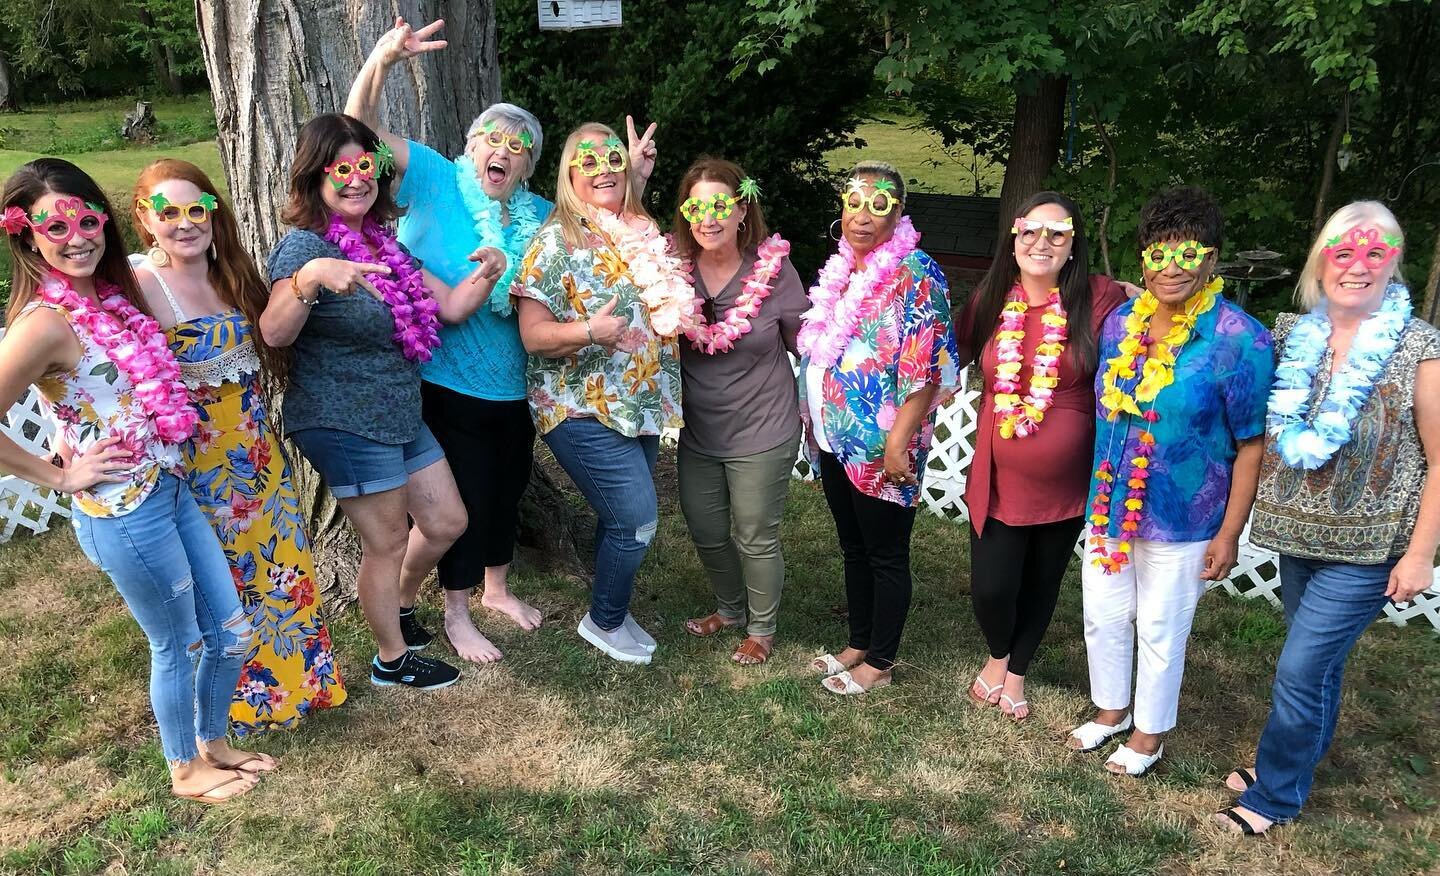 So many laughs at our women&rsquo;s luau tonight! 🌸 

#mymotionchurch #community #waterburyct #brasscity #connecticutchurch #womensministry